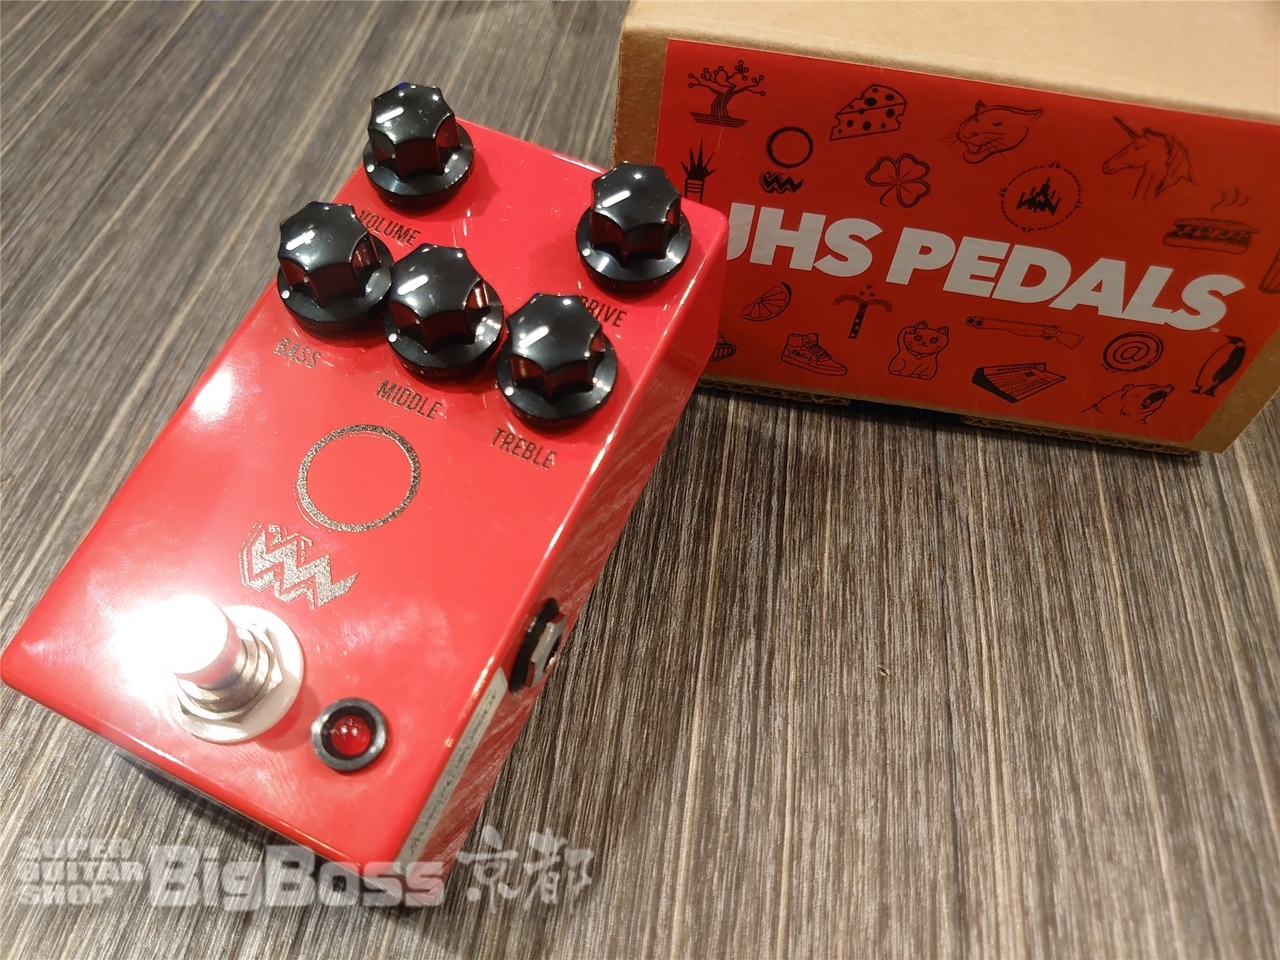 JHS PEDALS ANGRY CHARLIE V3 アングリーチャーリー